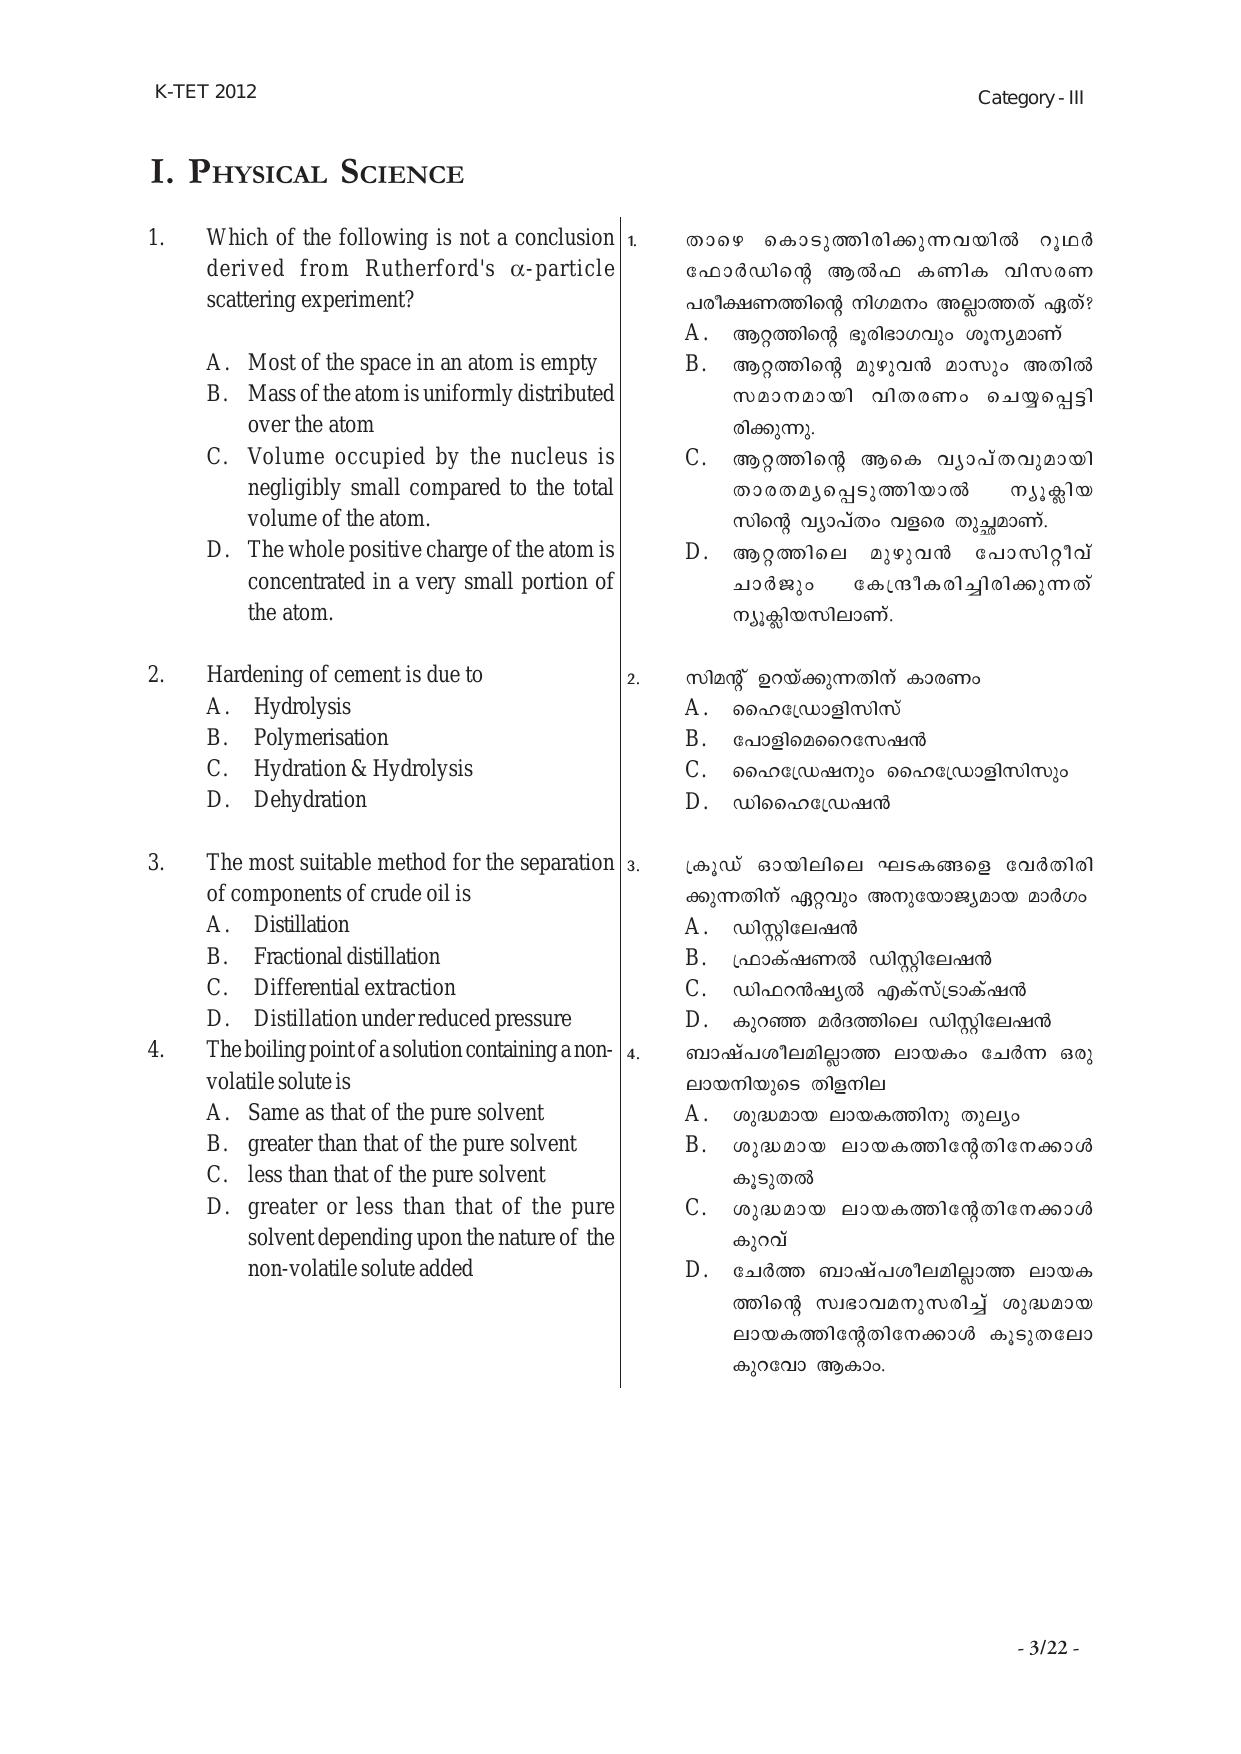 KTET Category III High School Teacher (8 to 10) Exam Previous Papers - Page 22